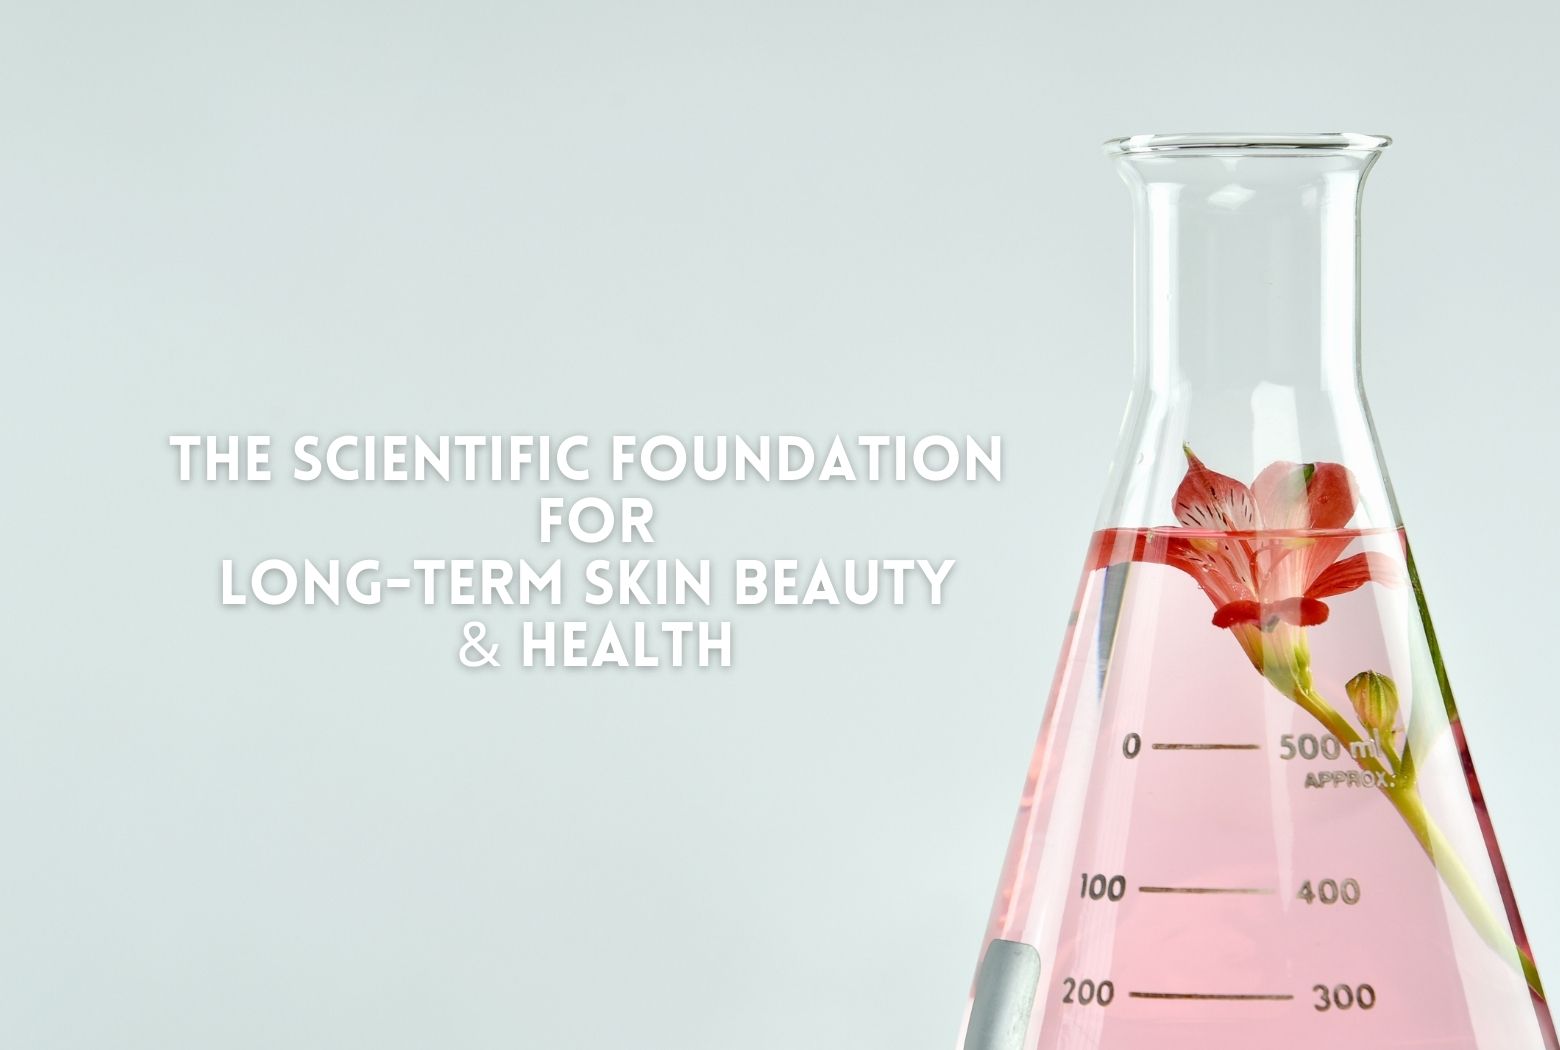 The Scientific Foundation for Long-Term Skin Beauty and Health